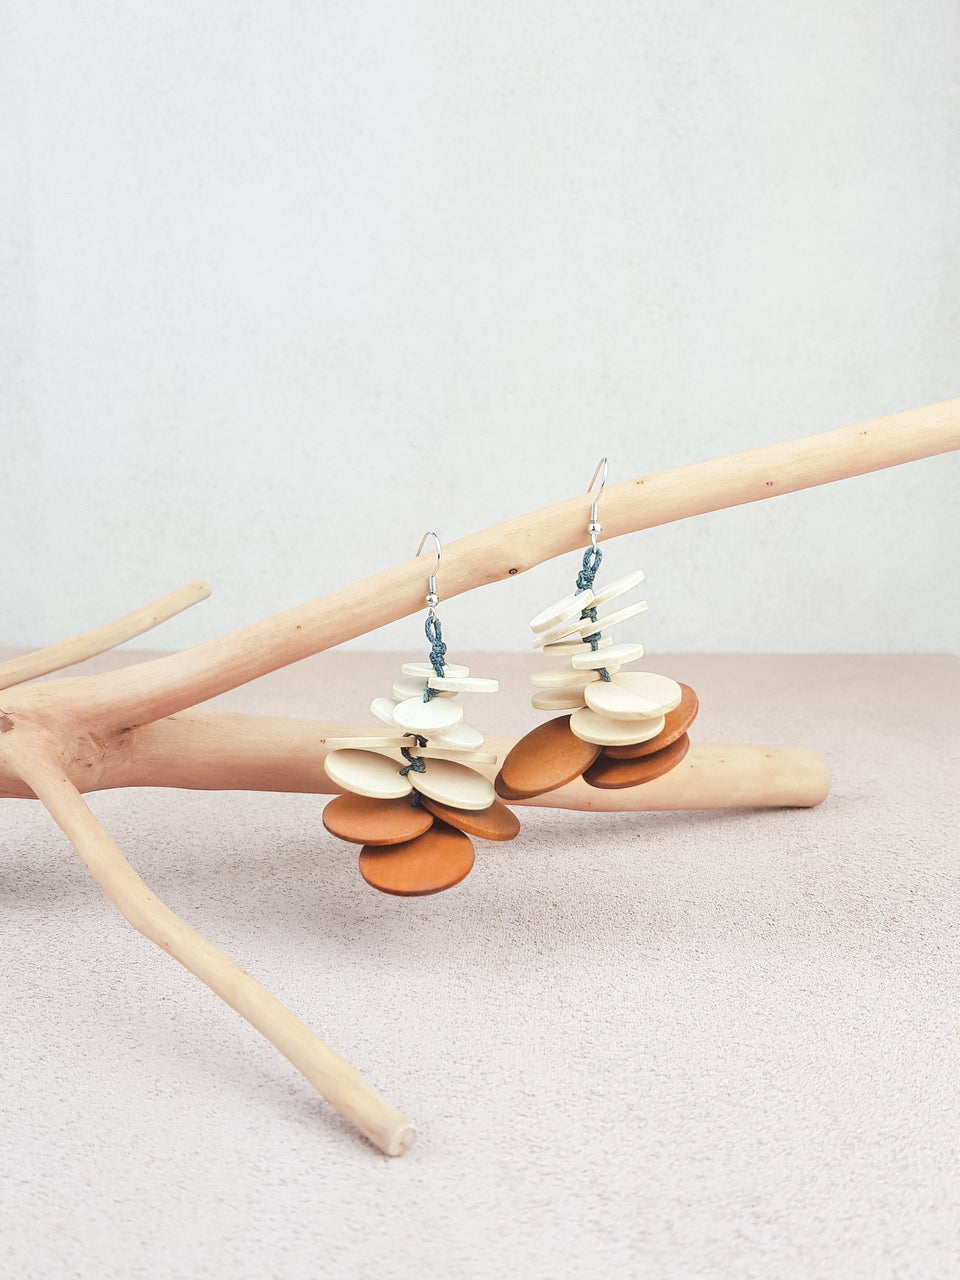 Handmade wood fish hook statement earrings in natural and brown.